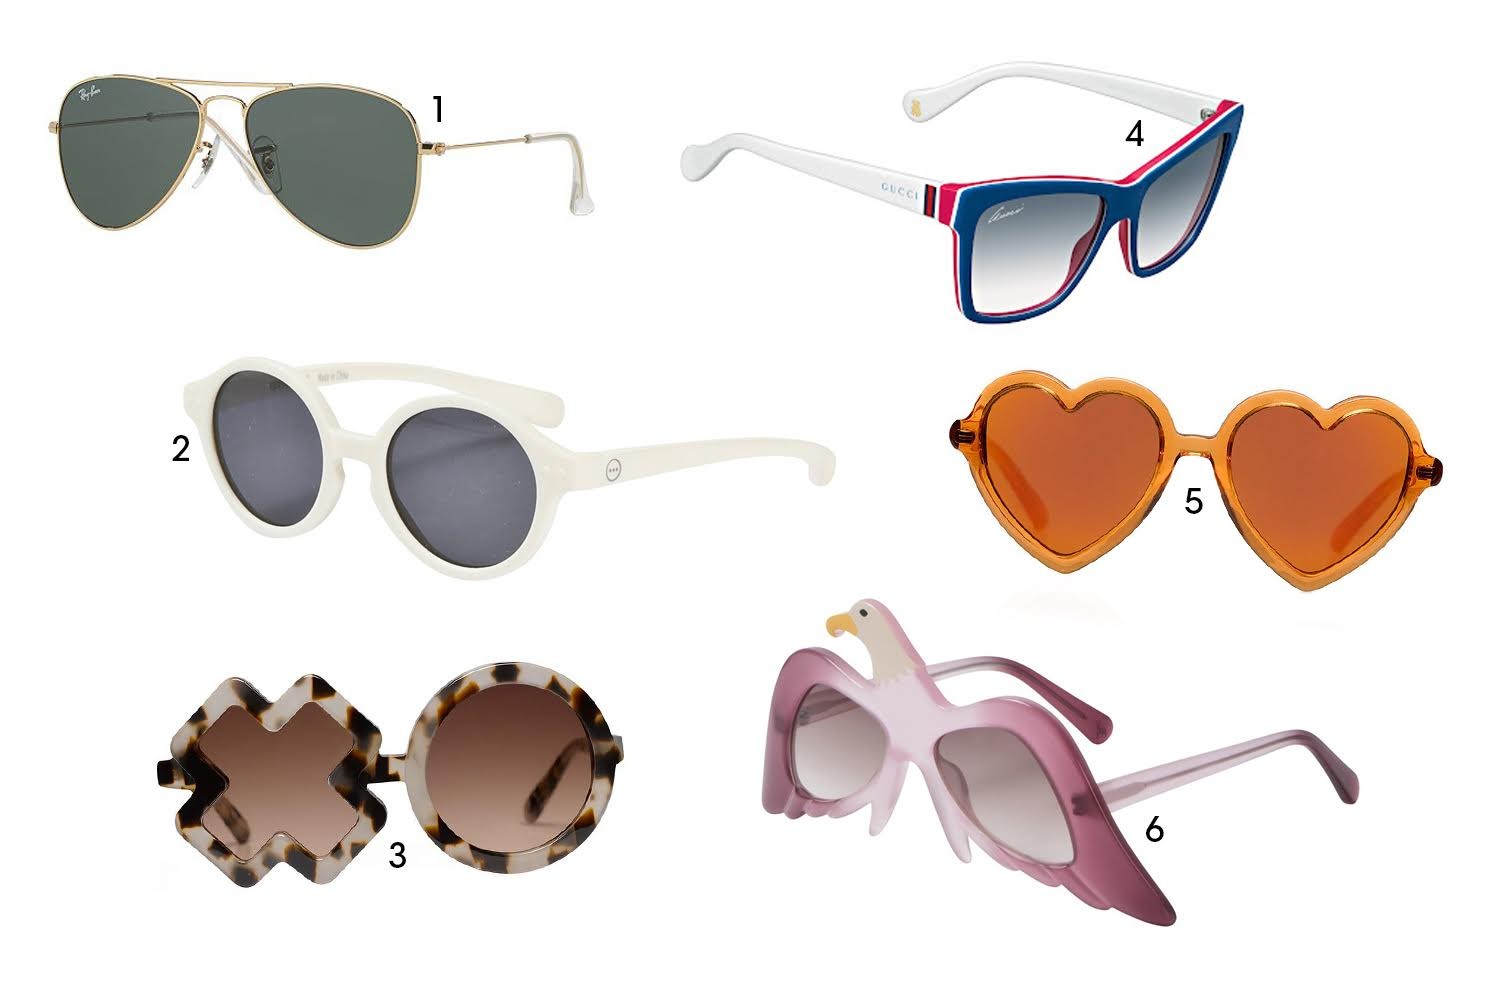 1. Ray Ban, 2. Izipisi, 3. Sons and Daughters, 4. Gucci, 5. Sons and Daughters, 6. Stella McCartney (Foto: Divulgação)